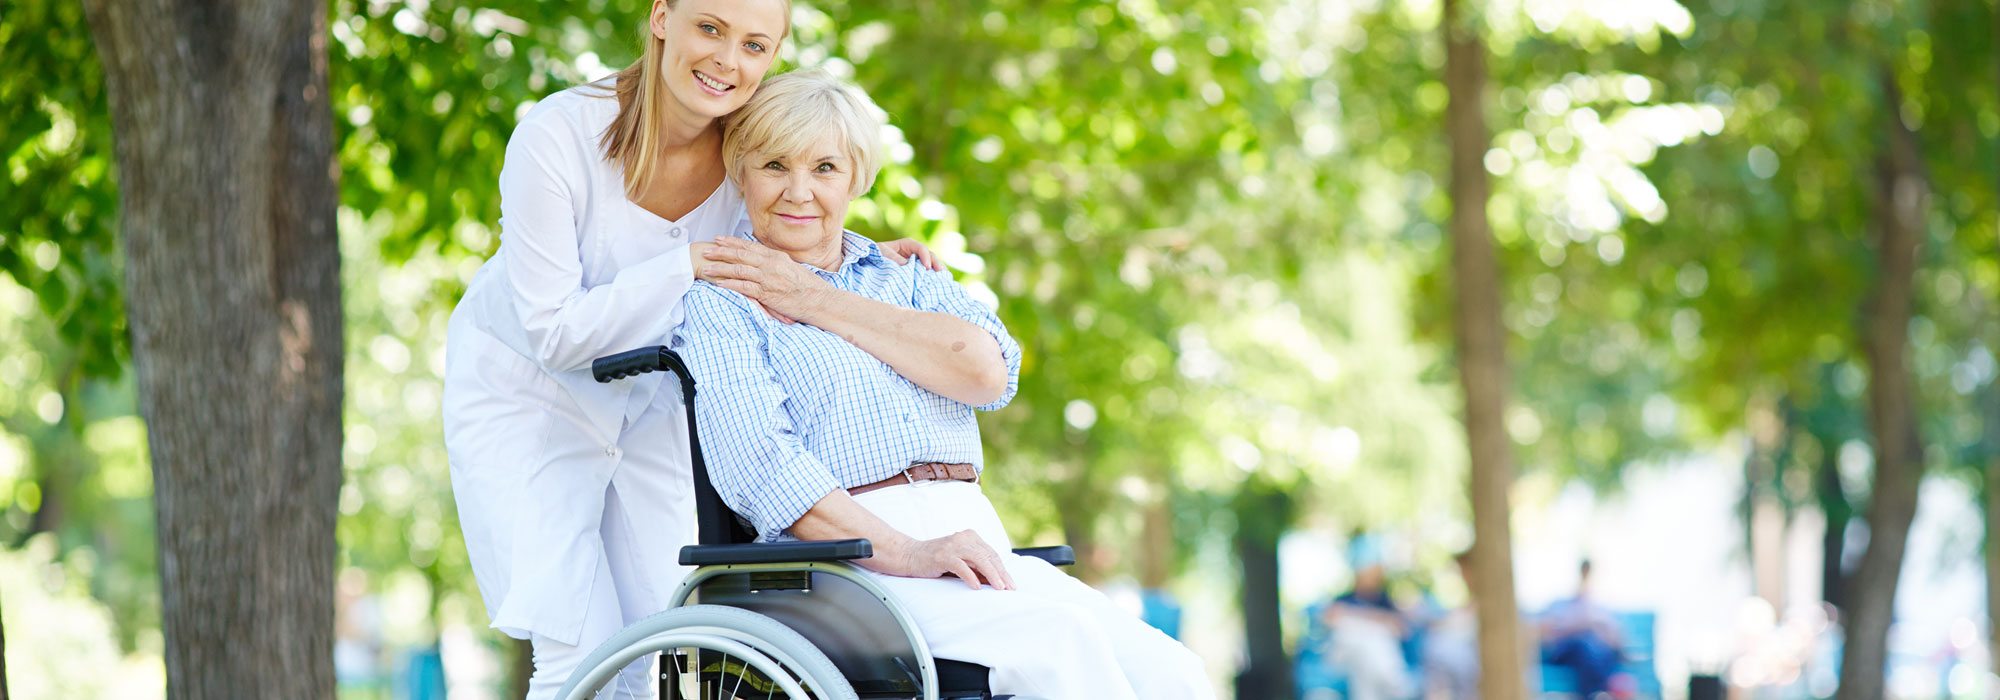 Carer - Woman In White Shirt Assisting Lady In Wheelchair